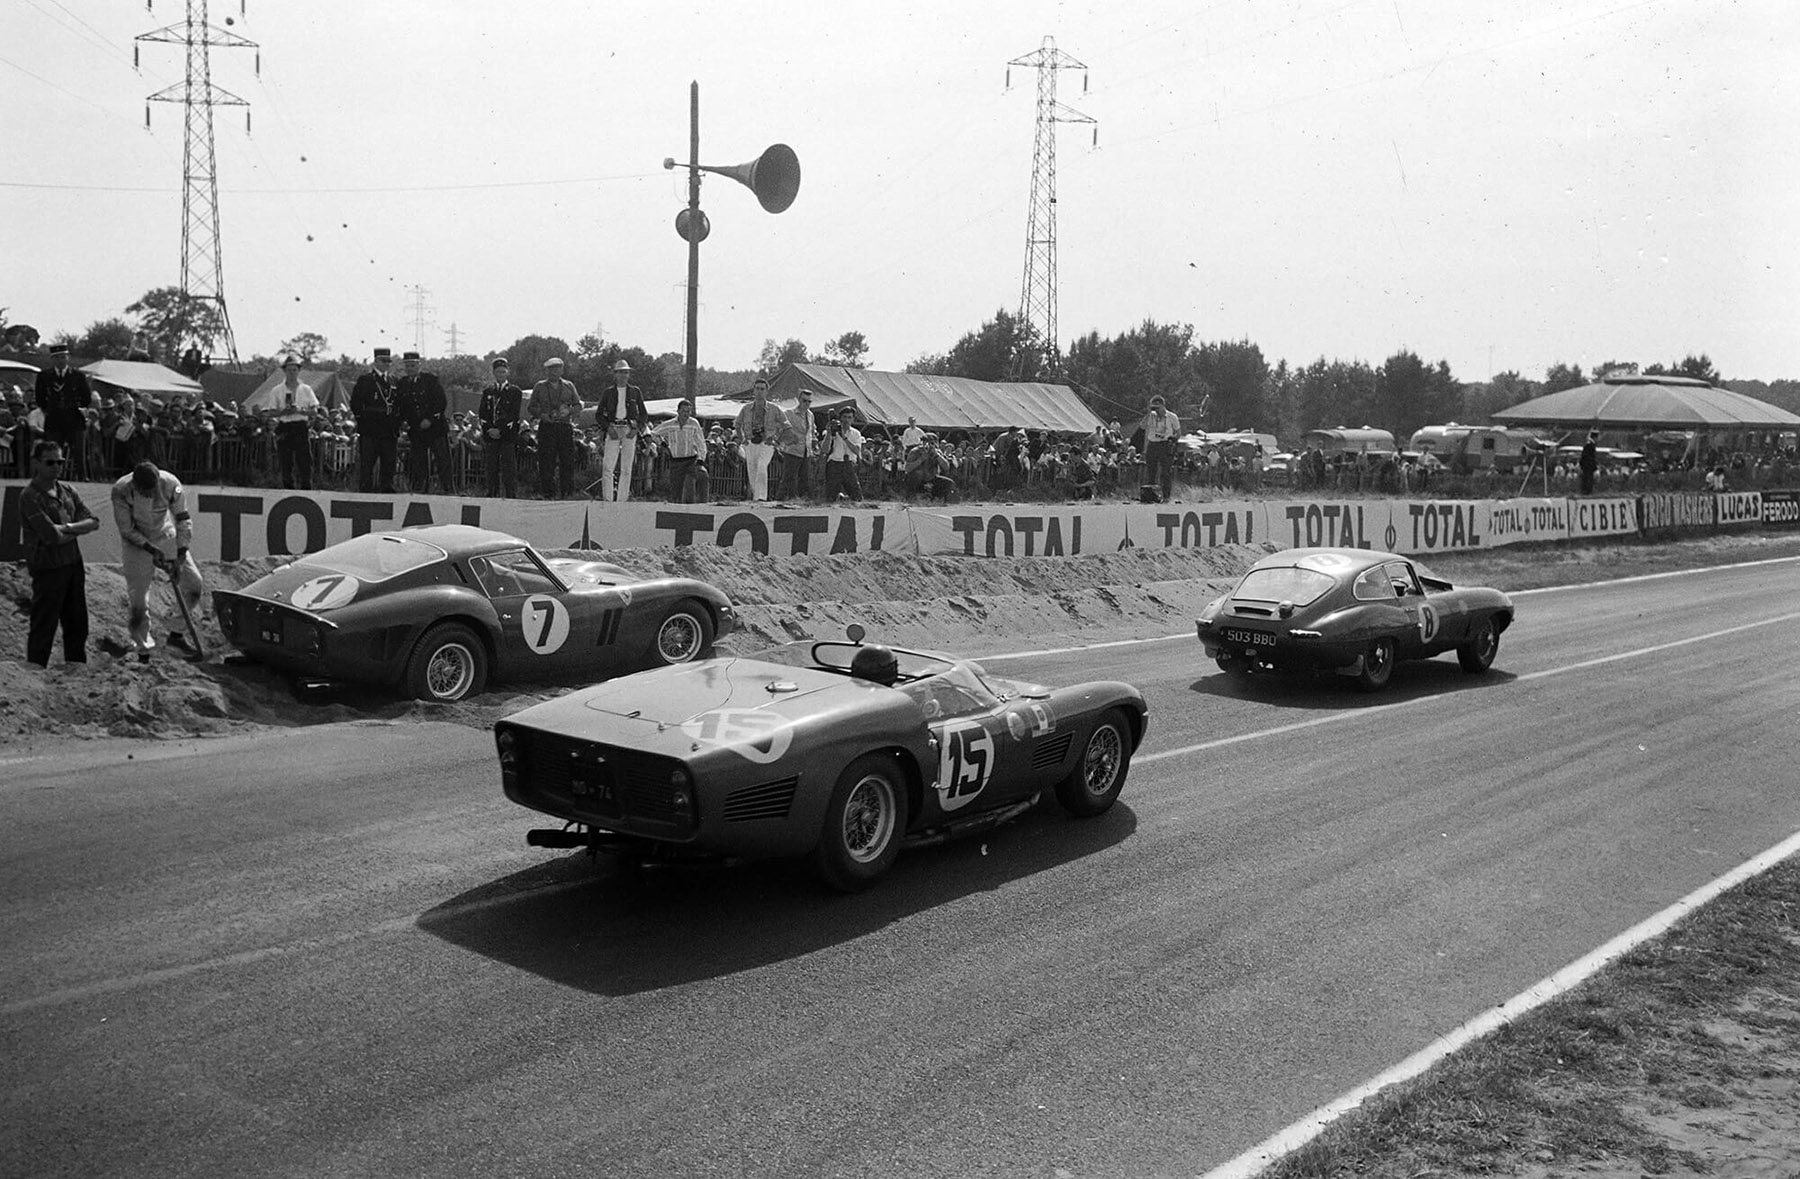 Maurice Charles and John Coundley’s Jaguar E-type (#8), leads Joakim Bonnier and Dan Gurney’s Ferrari 250 TRI/61 (#15) past Mike Parkes and Lorenzo Bandini’s Ferrari (#7) beached by the side of the track during the 24 Hours of Le Mans at Circuit de la Sarthe on 24 June 1962.